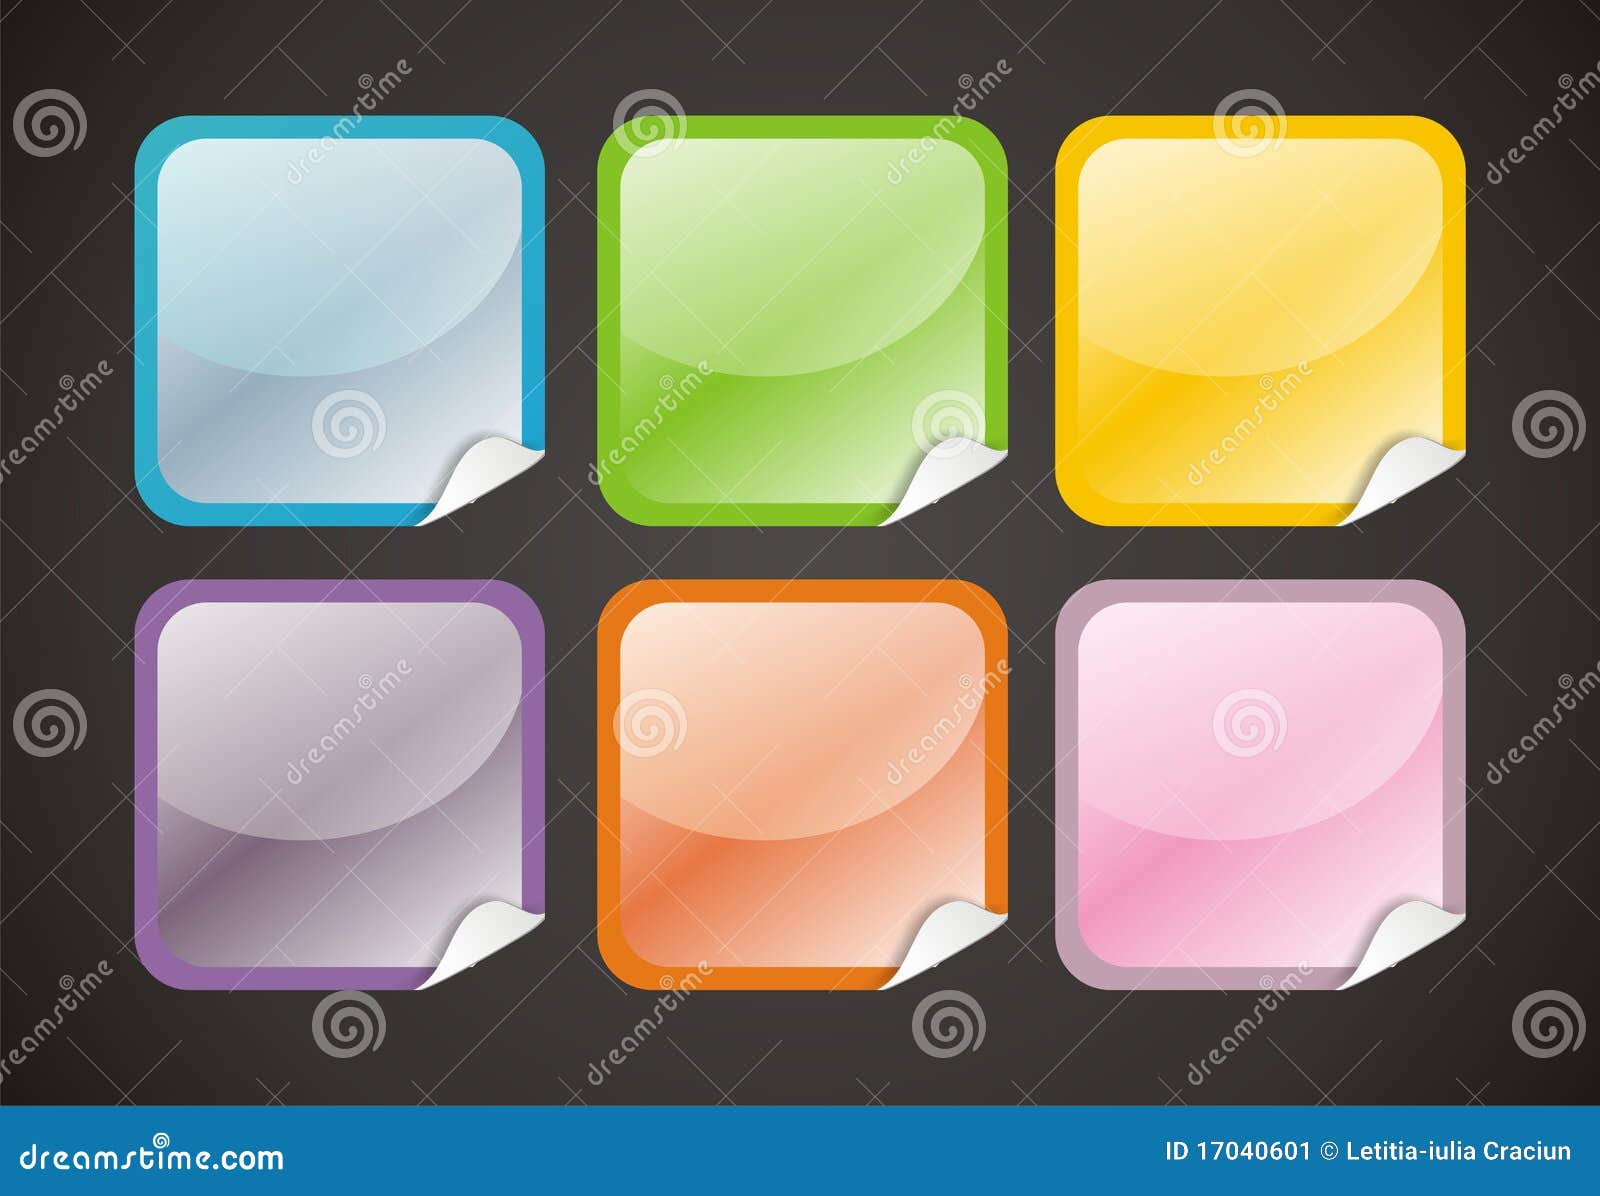 6 glossy web buttons